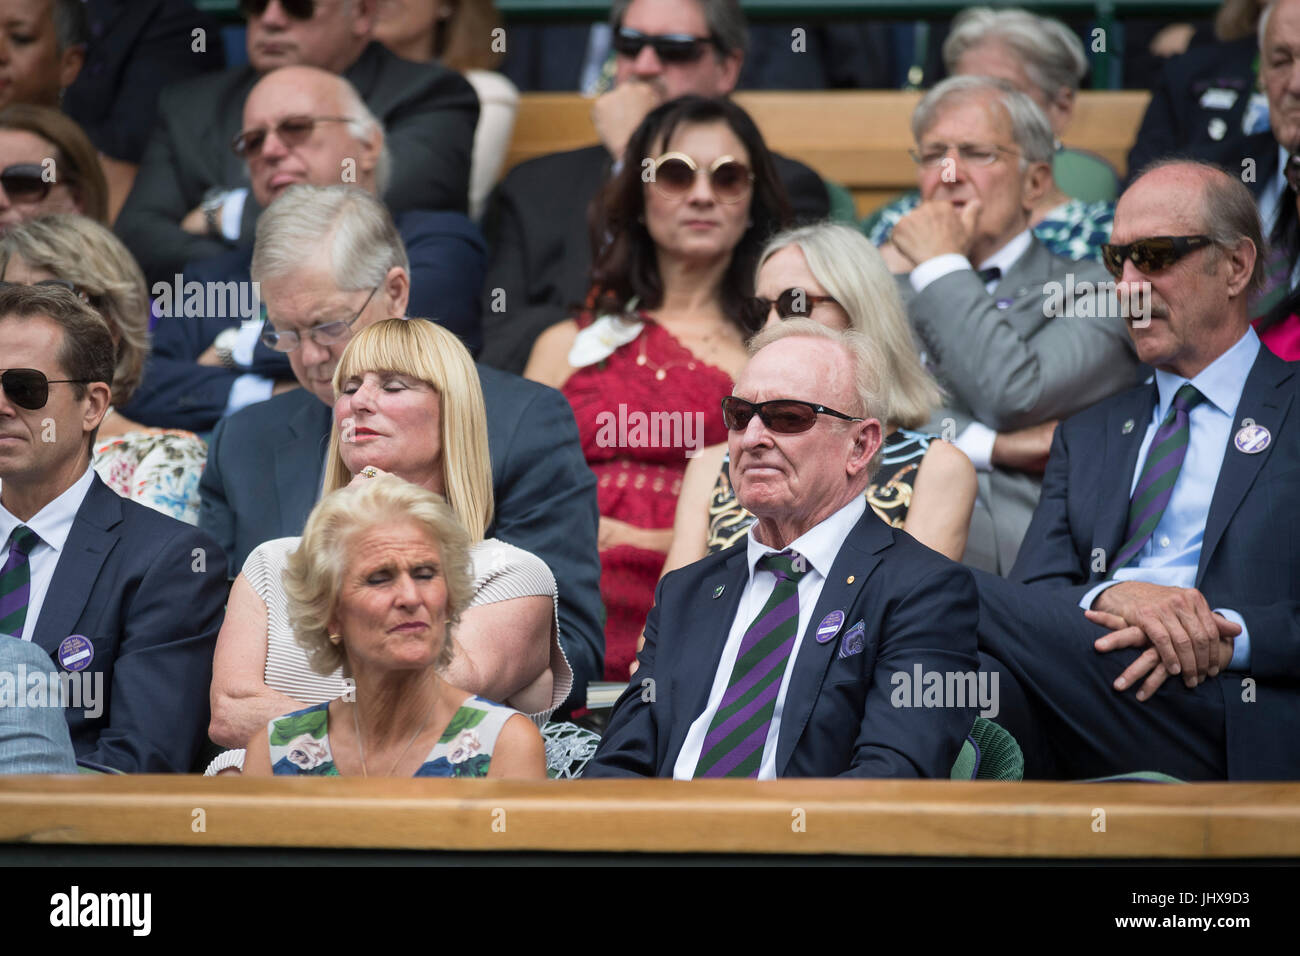 Wimbledon, London, UK. 16th July, 2017. The Wimbledon Tennis Championships 2017 held at The All England Lawn Tennis and Croquet Club, London, England, UK. GENTLEMEN'S SINGLES - FINAL Roger Federer (SUI) [3] v Marin Cilic (CRO) [7] on Centre Court. Rod Laver watches the match from the Royal Box . Credit: Duncan Grove/Alamy Live News Stock Photo